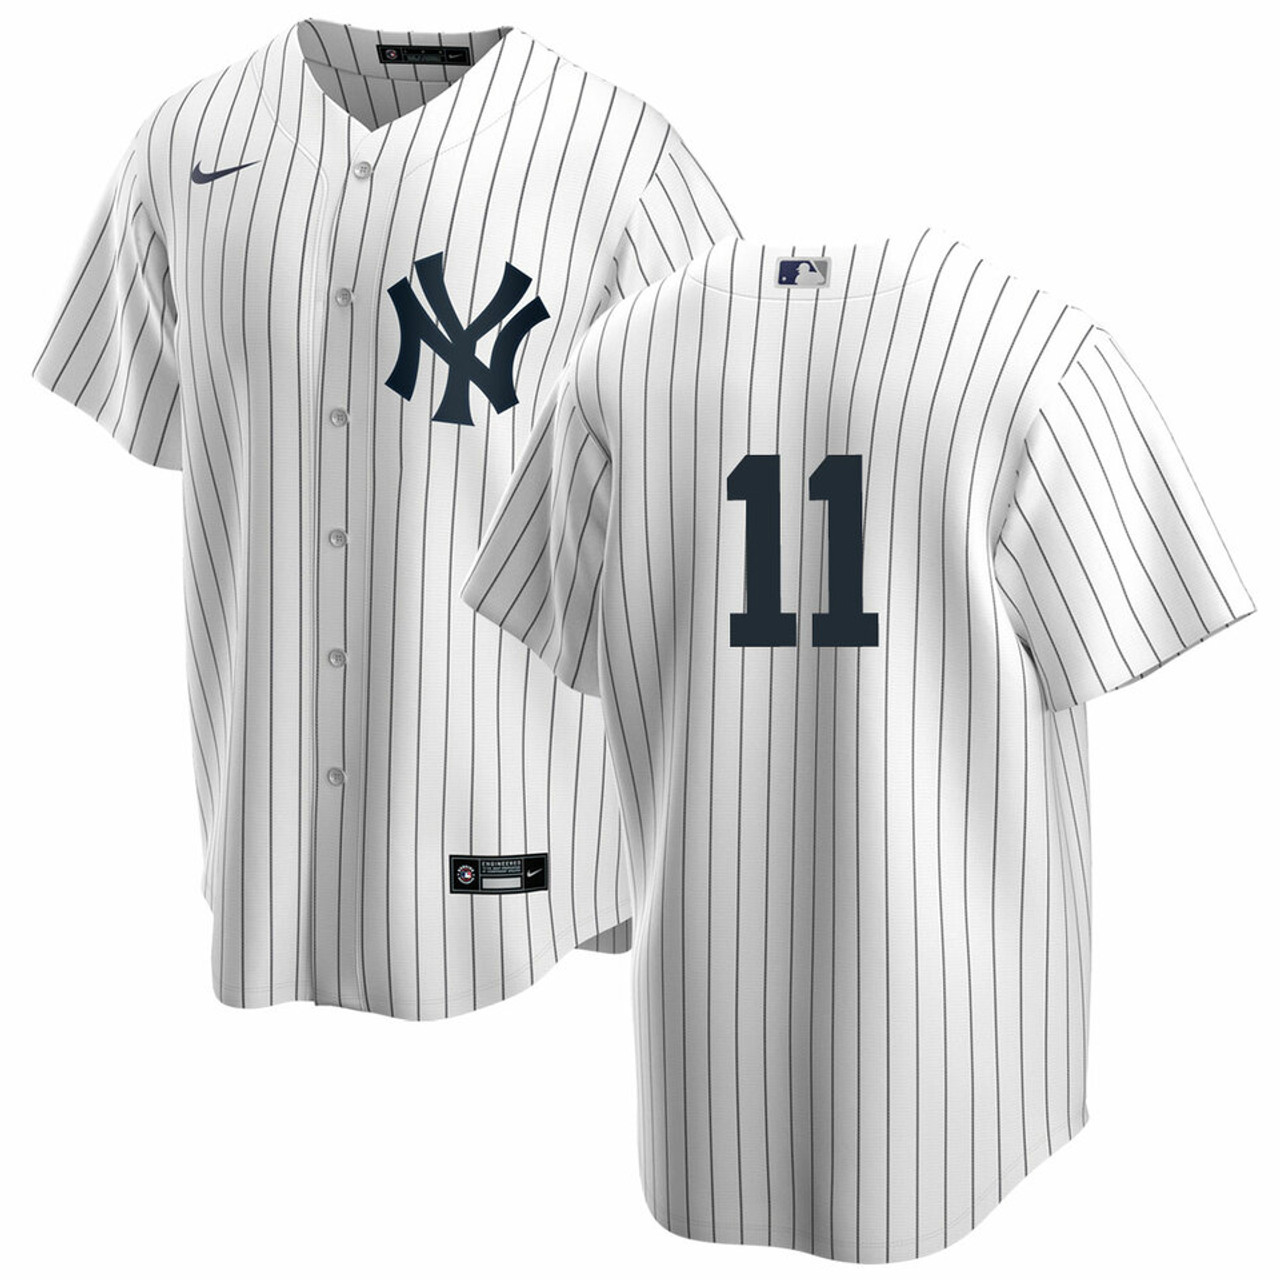 Brett Gardner No Name Youth Jersey - NY Yankees Kids Number Only Home Jersey